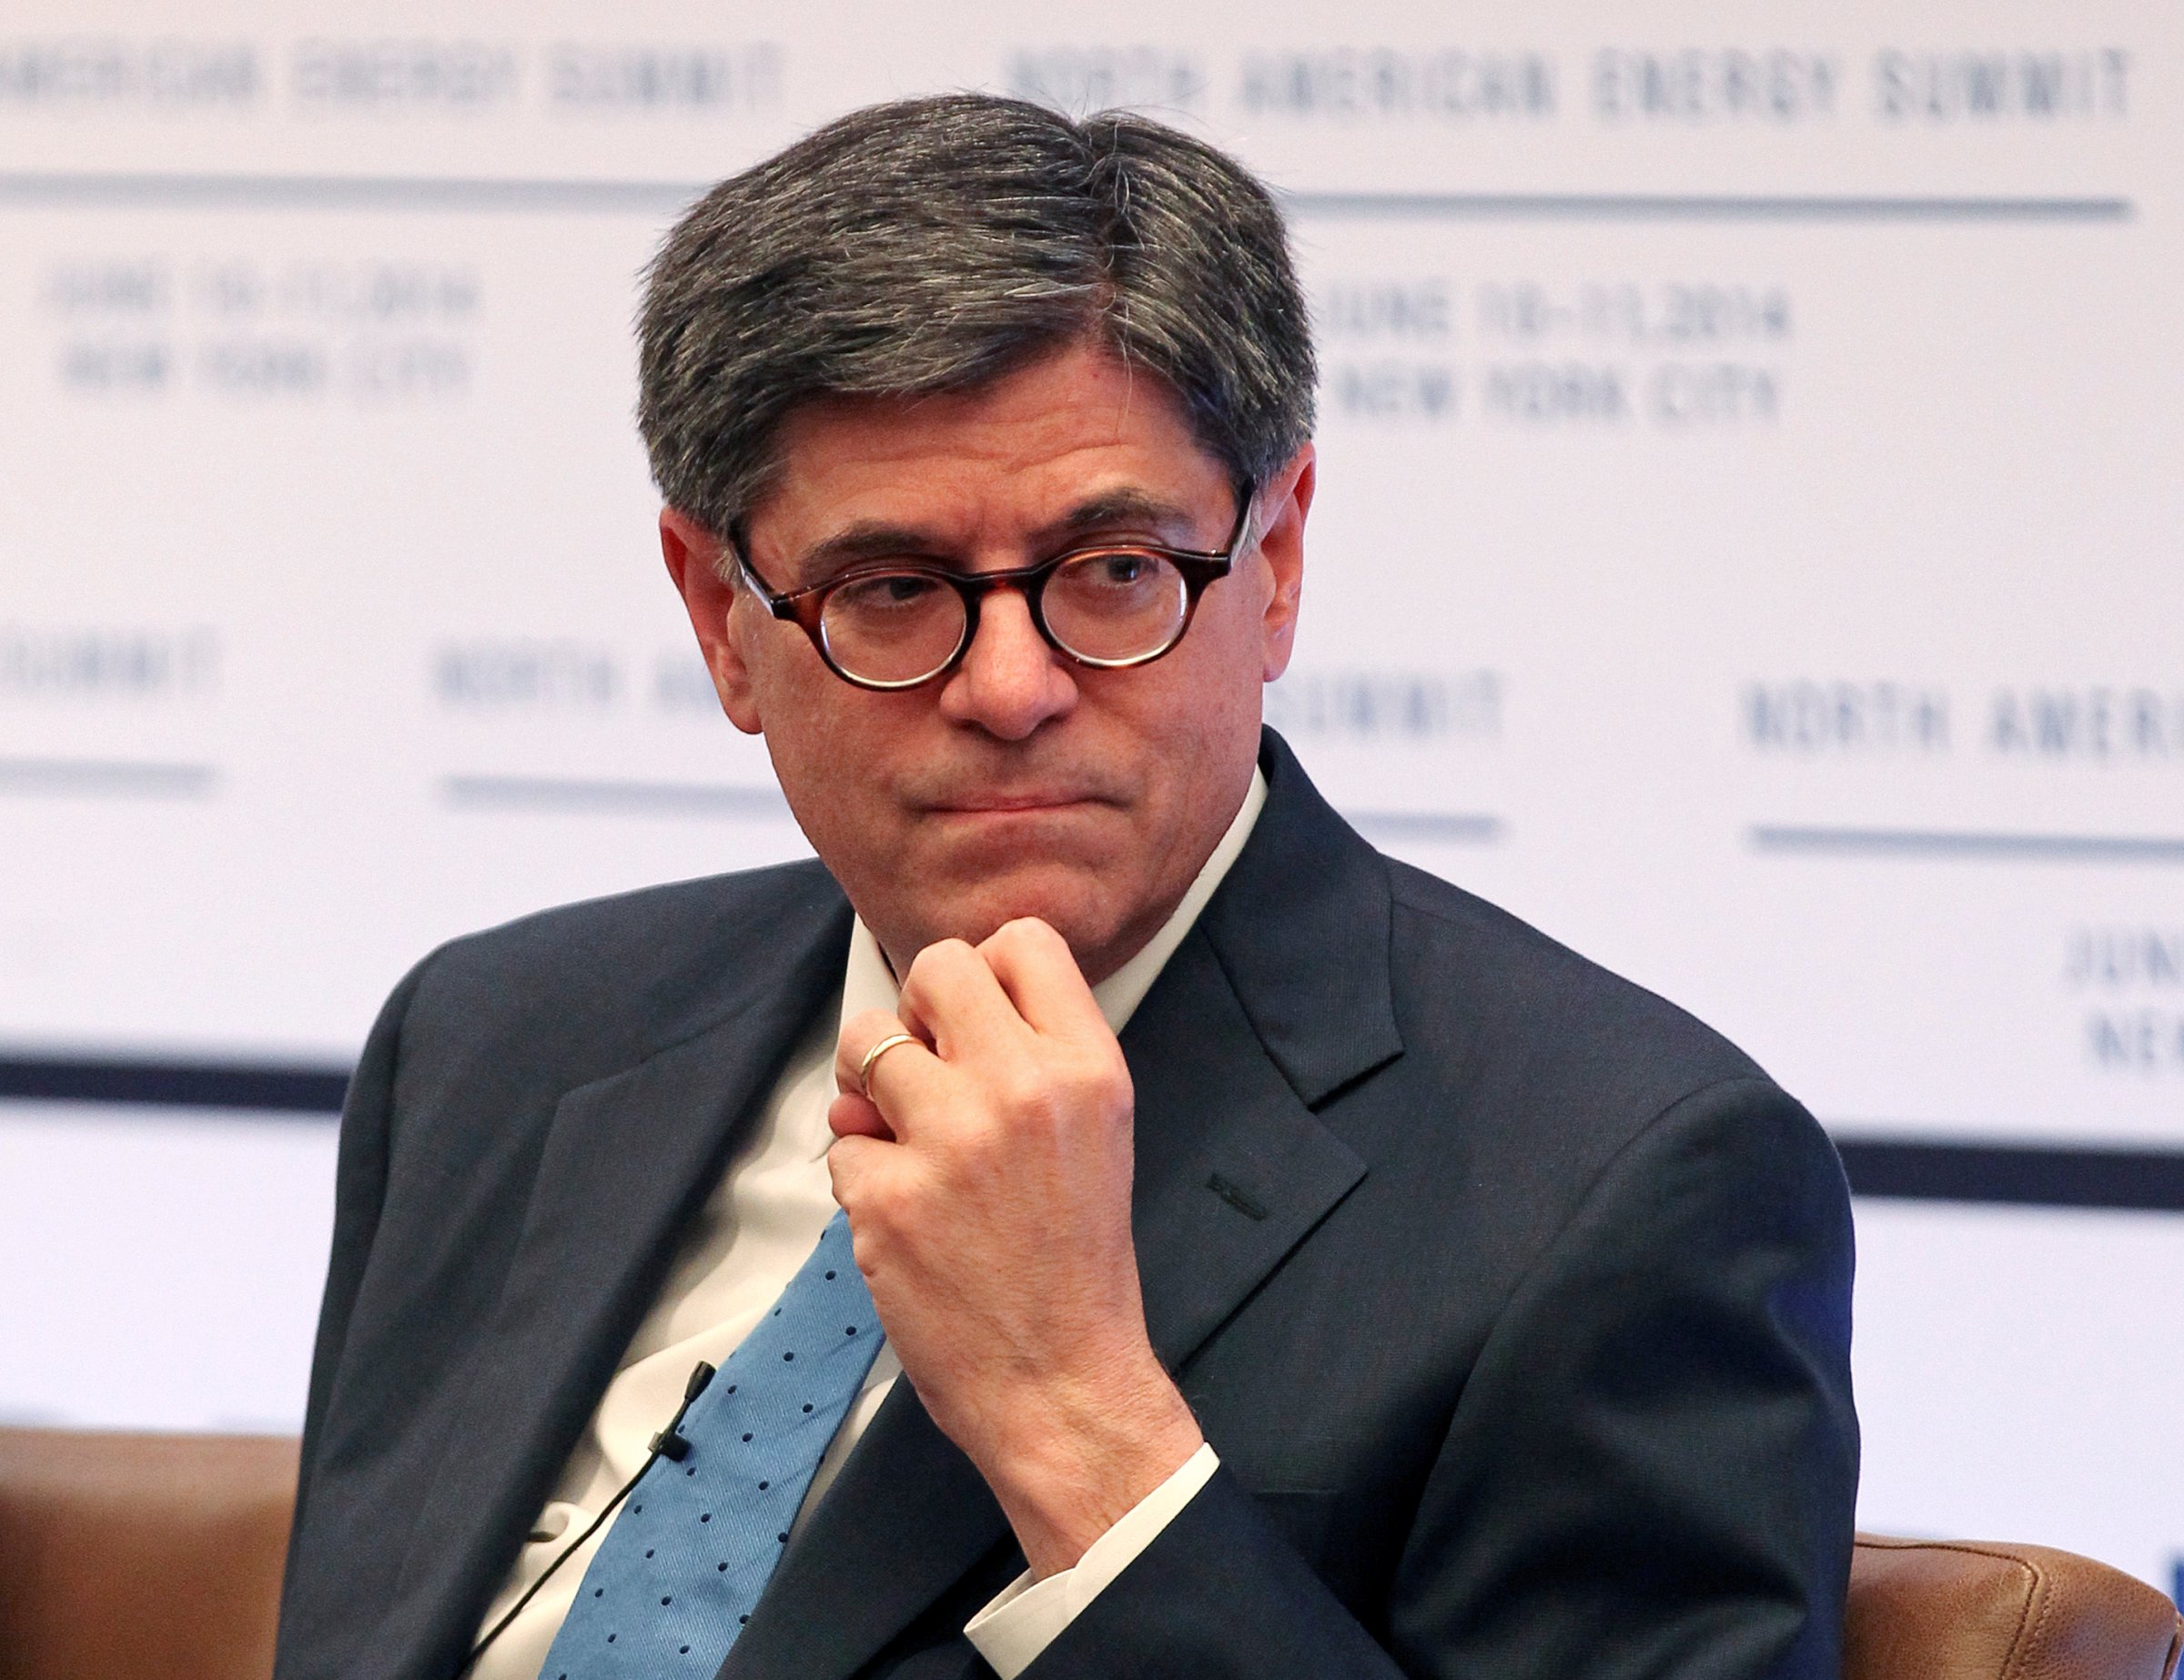 U.S. Treasury Secretary Jacob Lew listens during a panel discussion at the North American Energy Summit in the Manhattan borough of New York